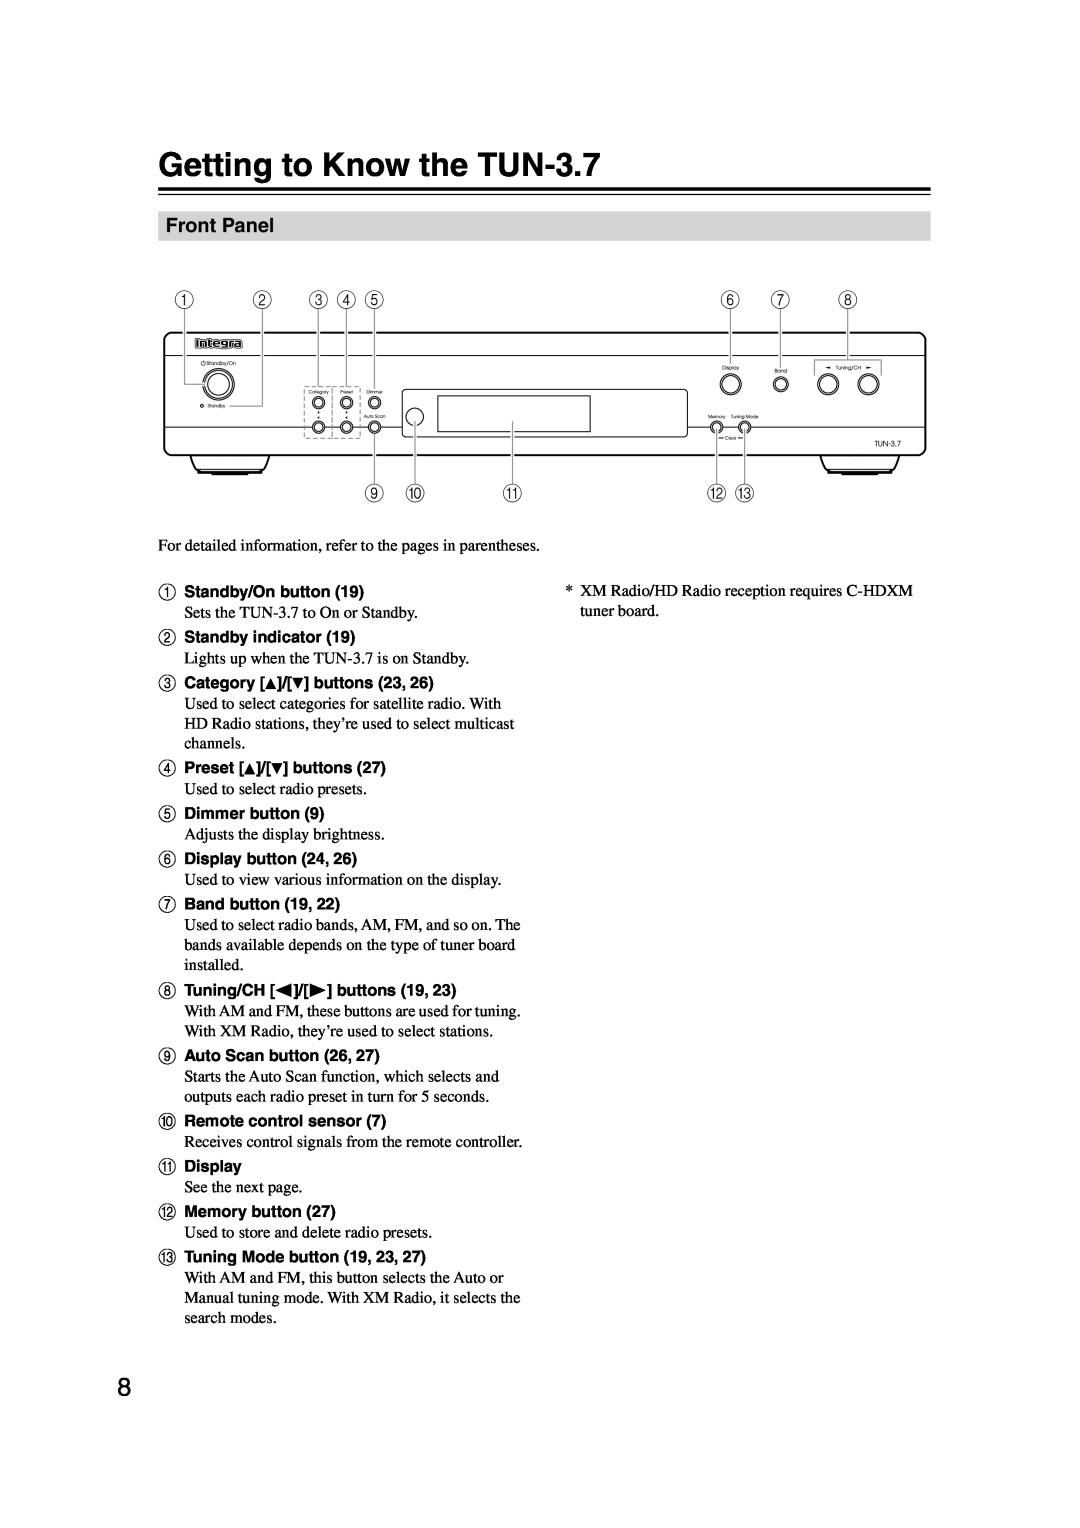 Integra instruction manual Getting to Know the TUN-3.7, Front Panel, A B C 